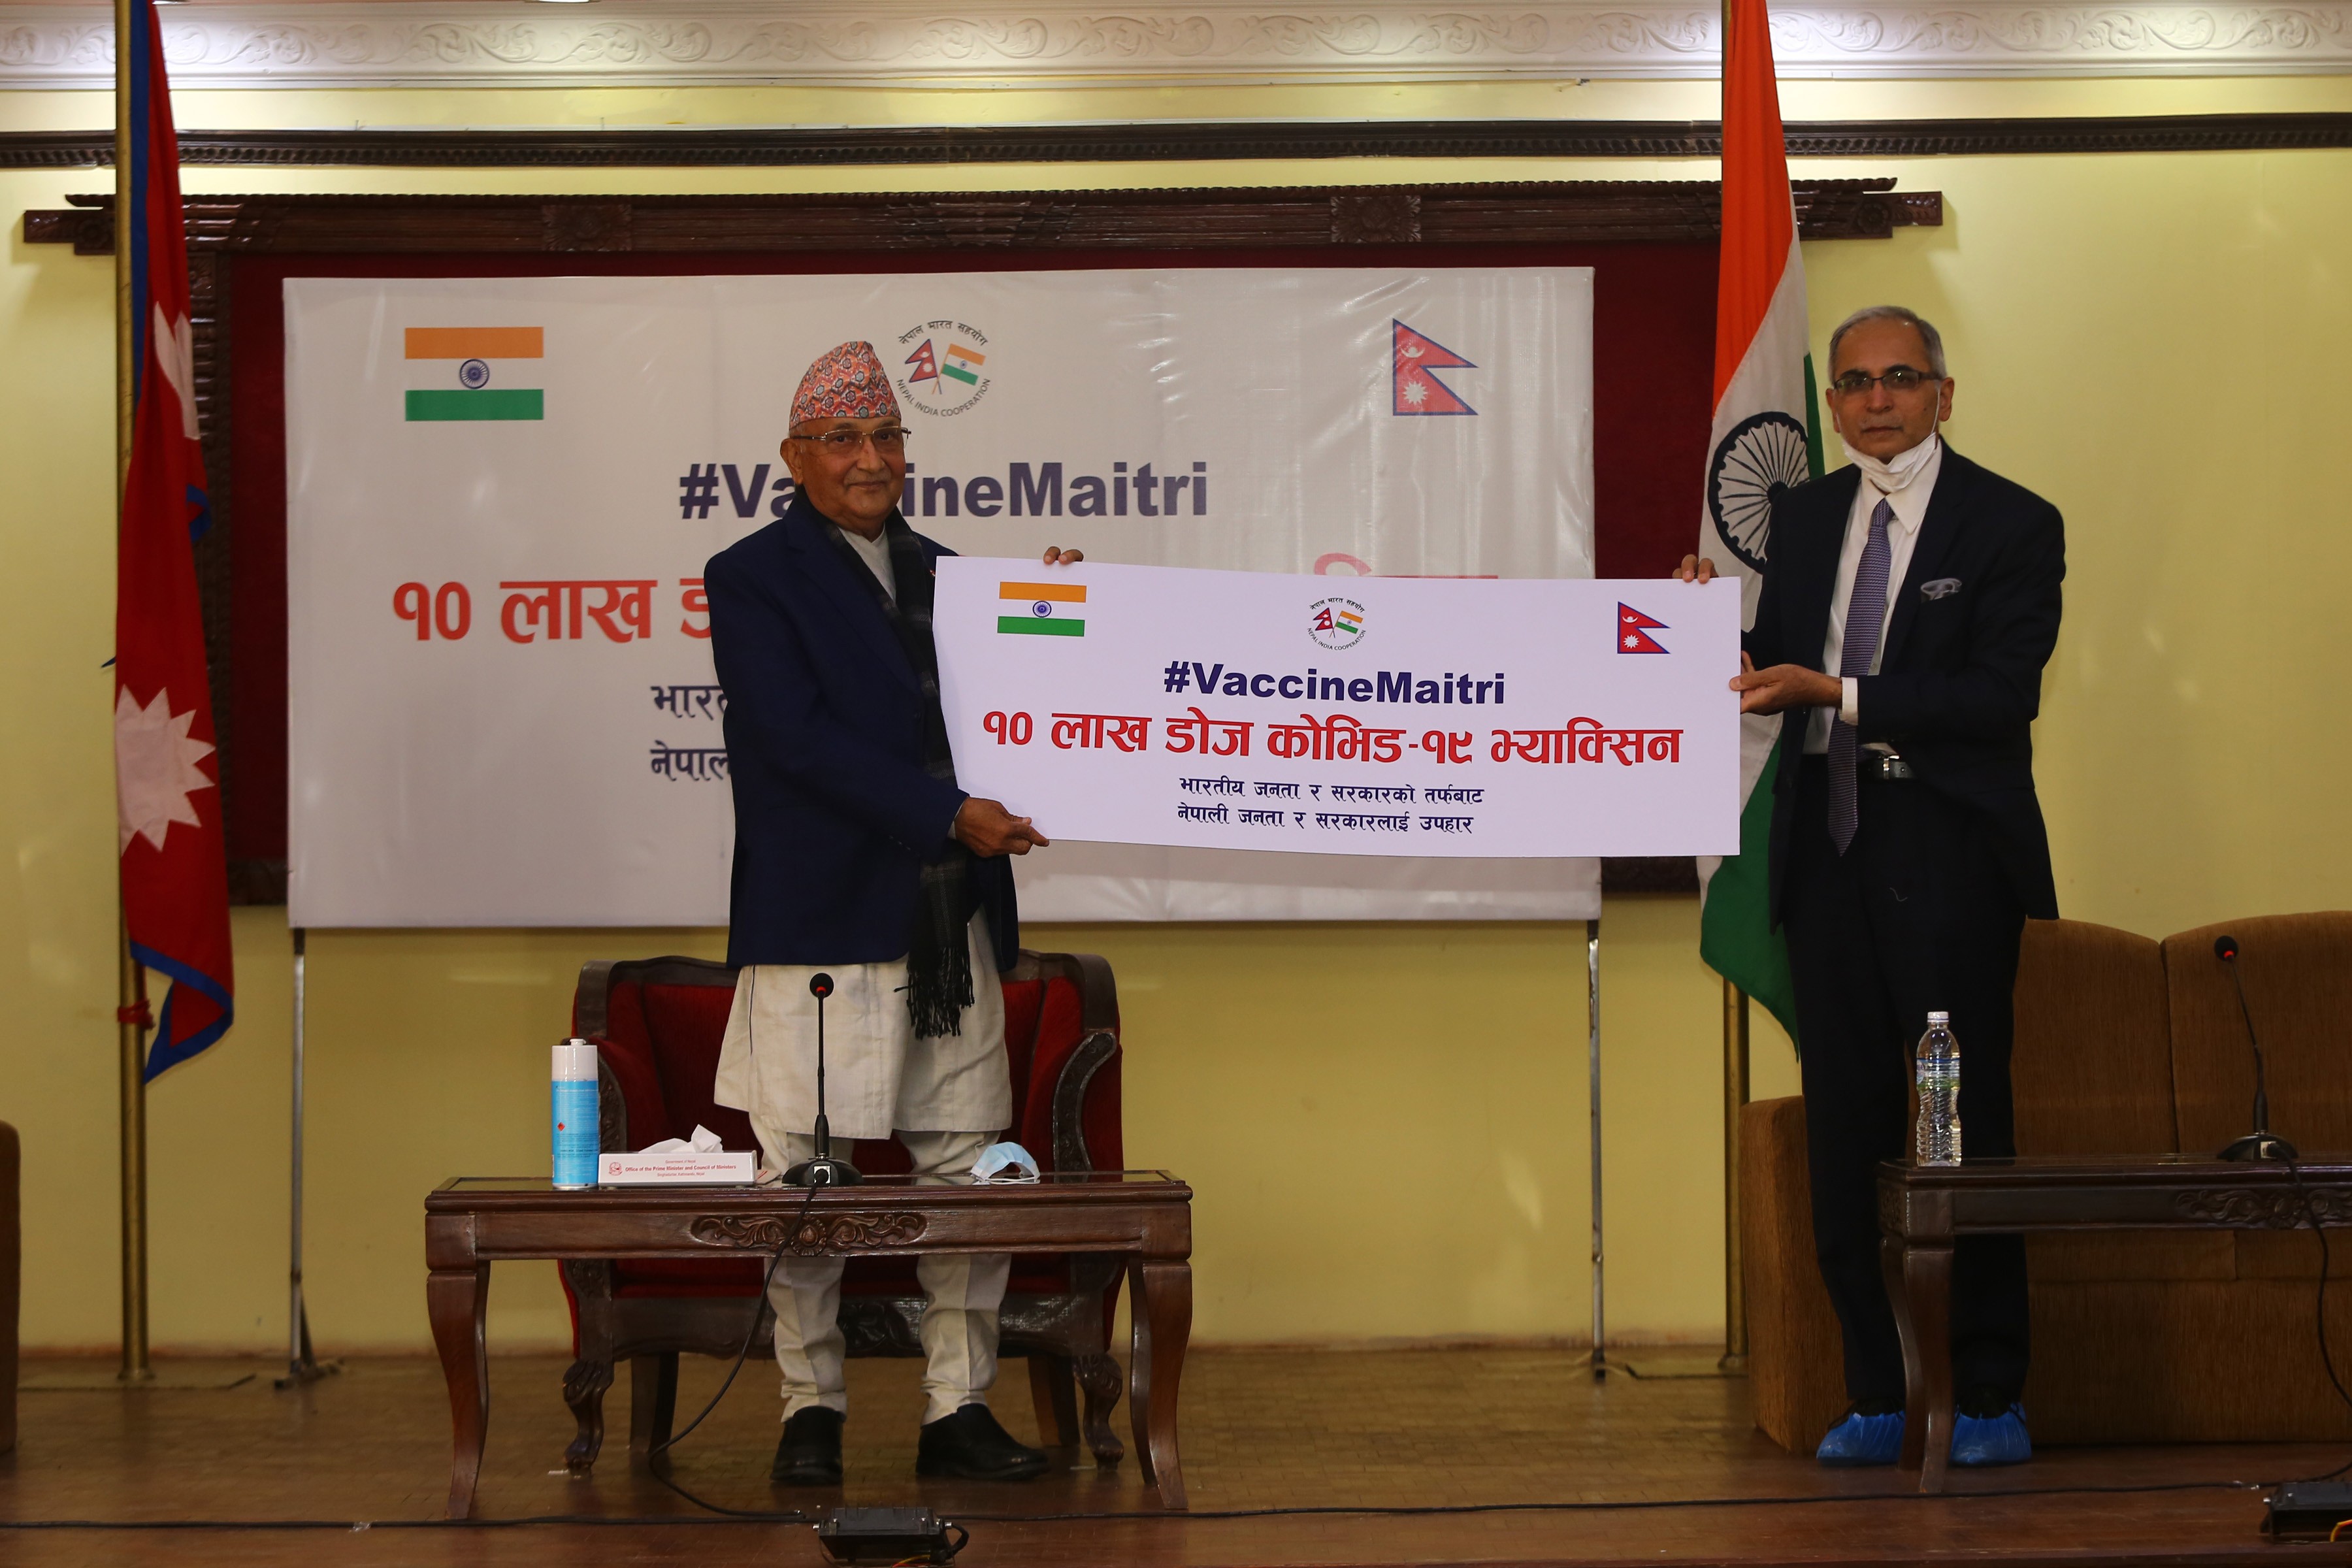 India hands over 1 million doses of vaccines to Nepal